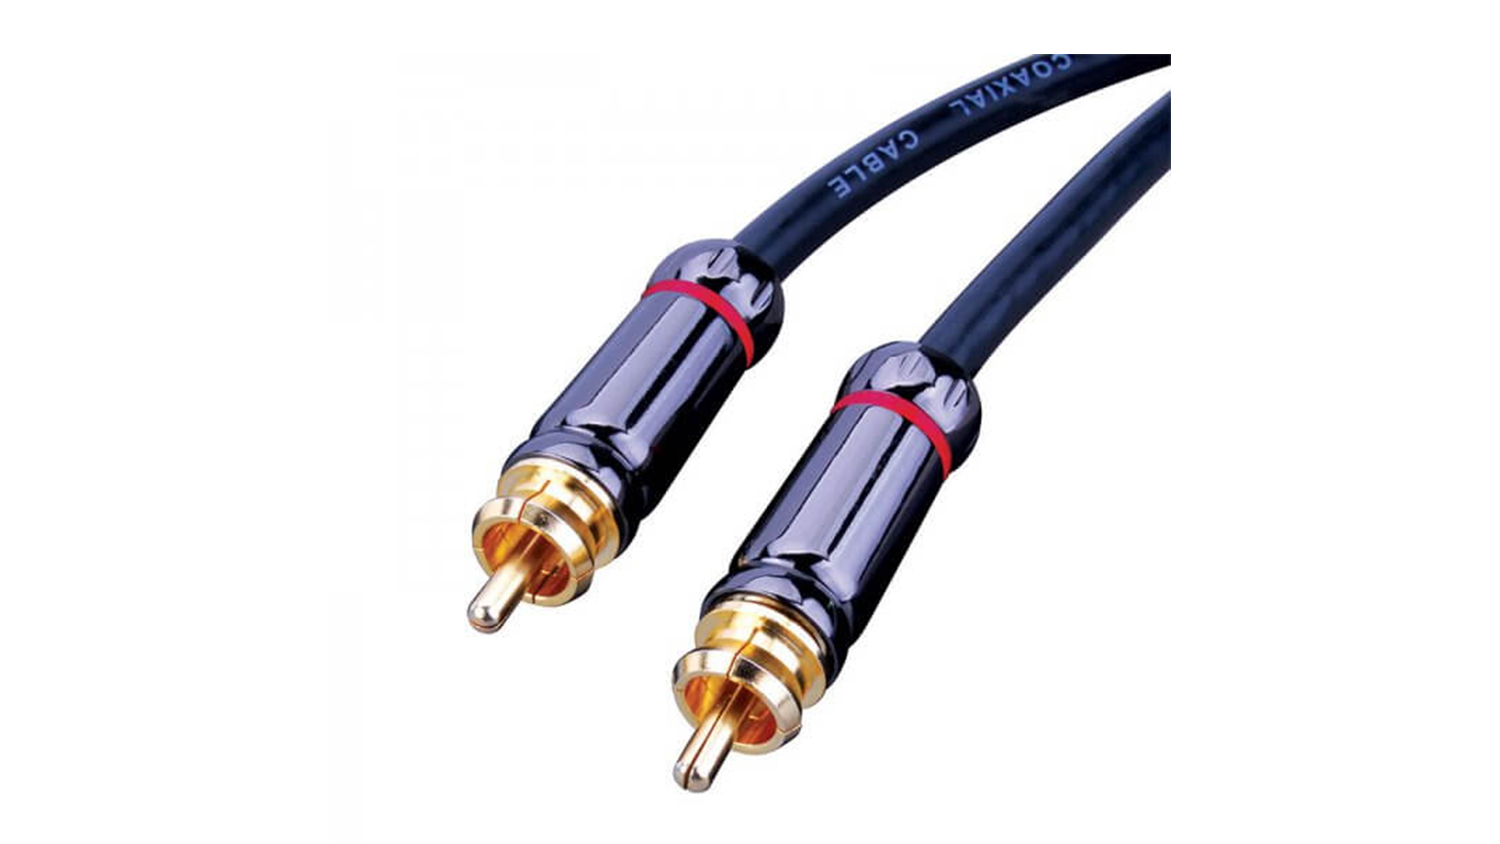 monster rca connector